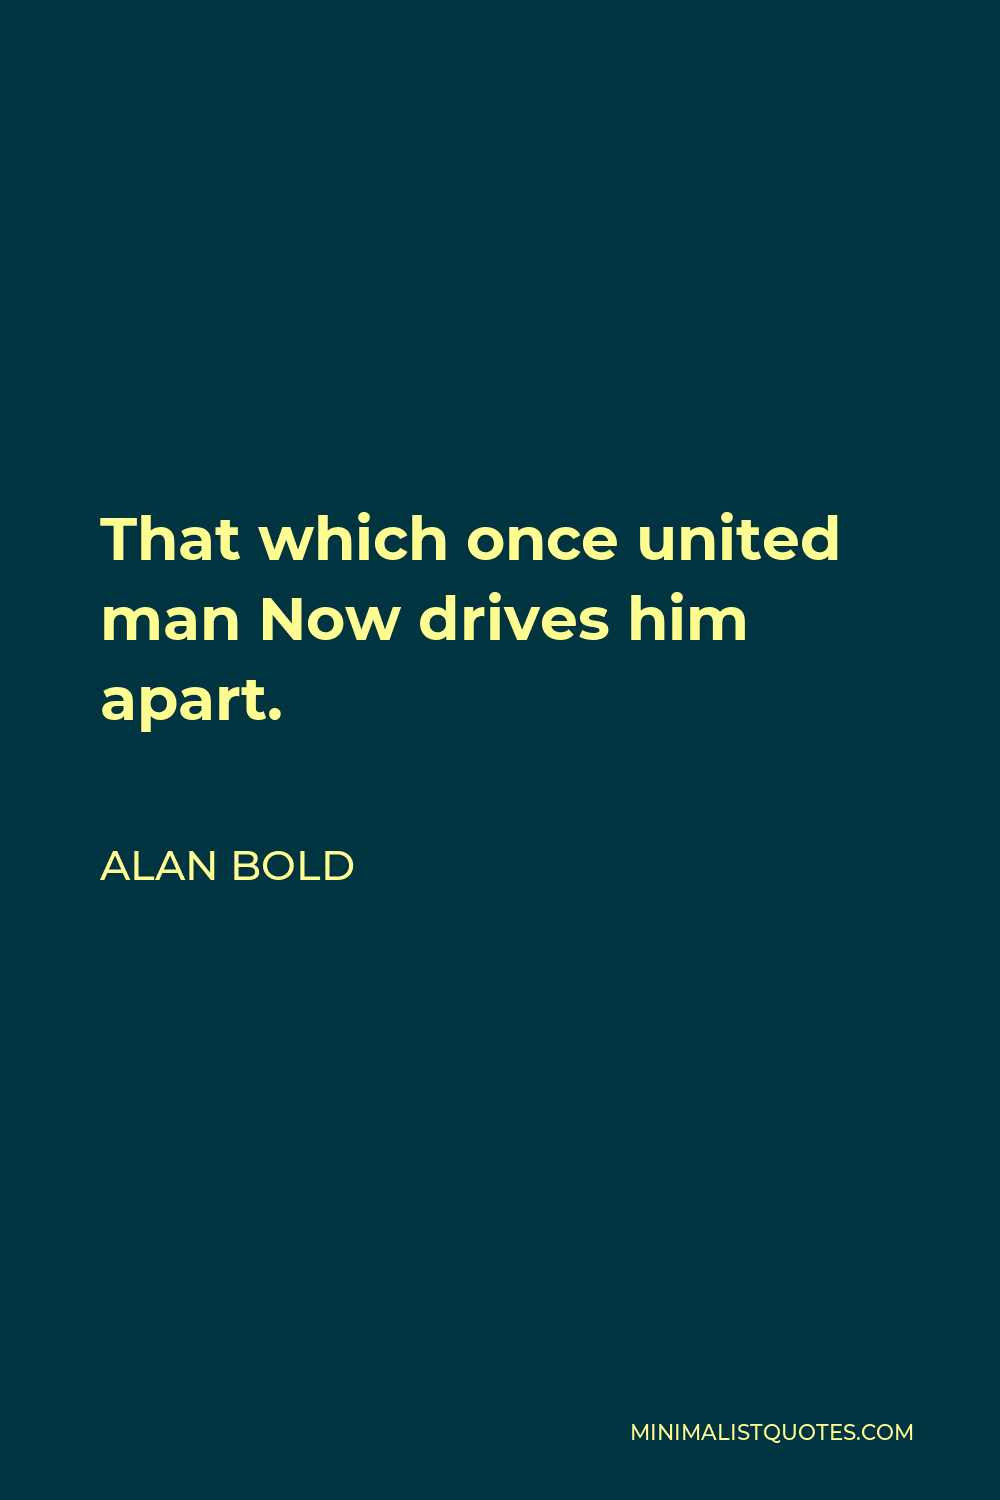 Alan Bold Quote - That which once united man Now drives him apart.